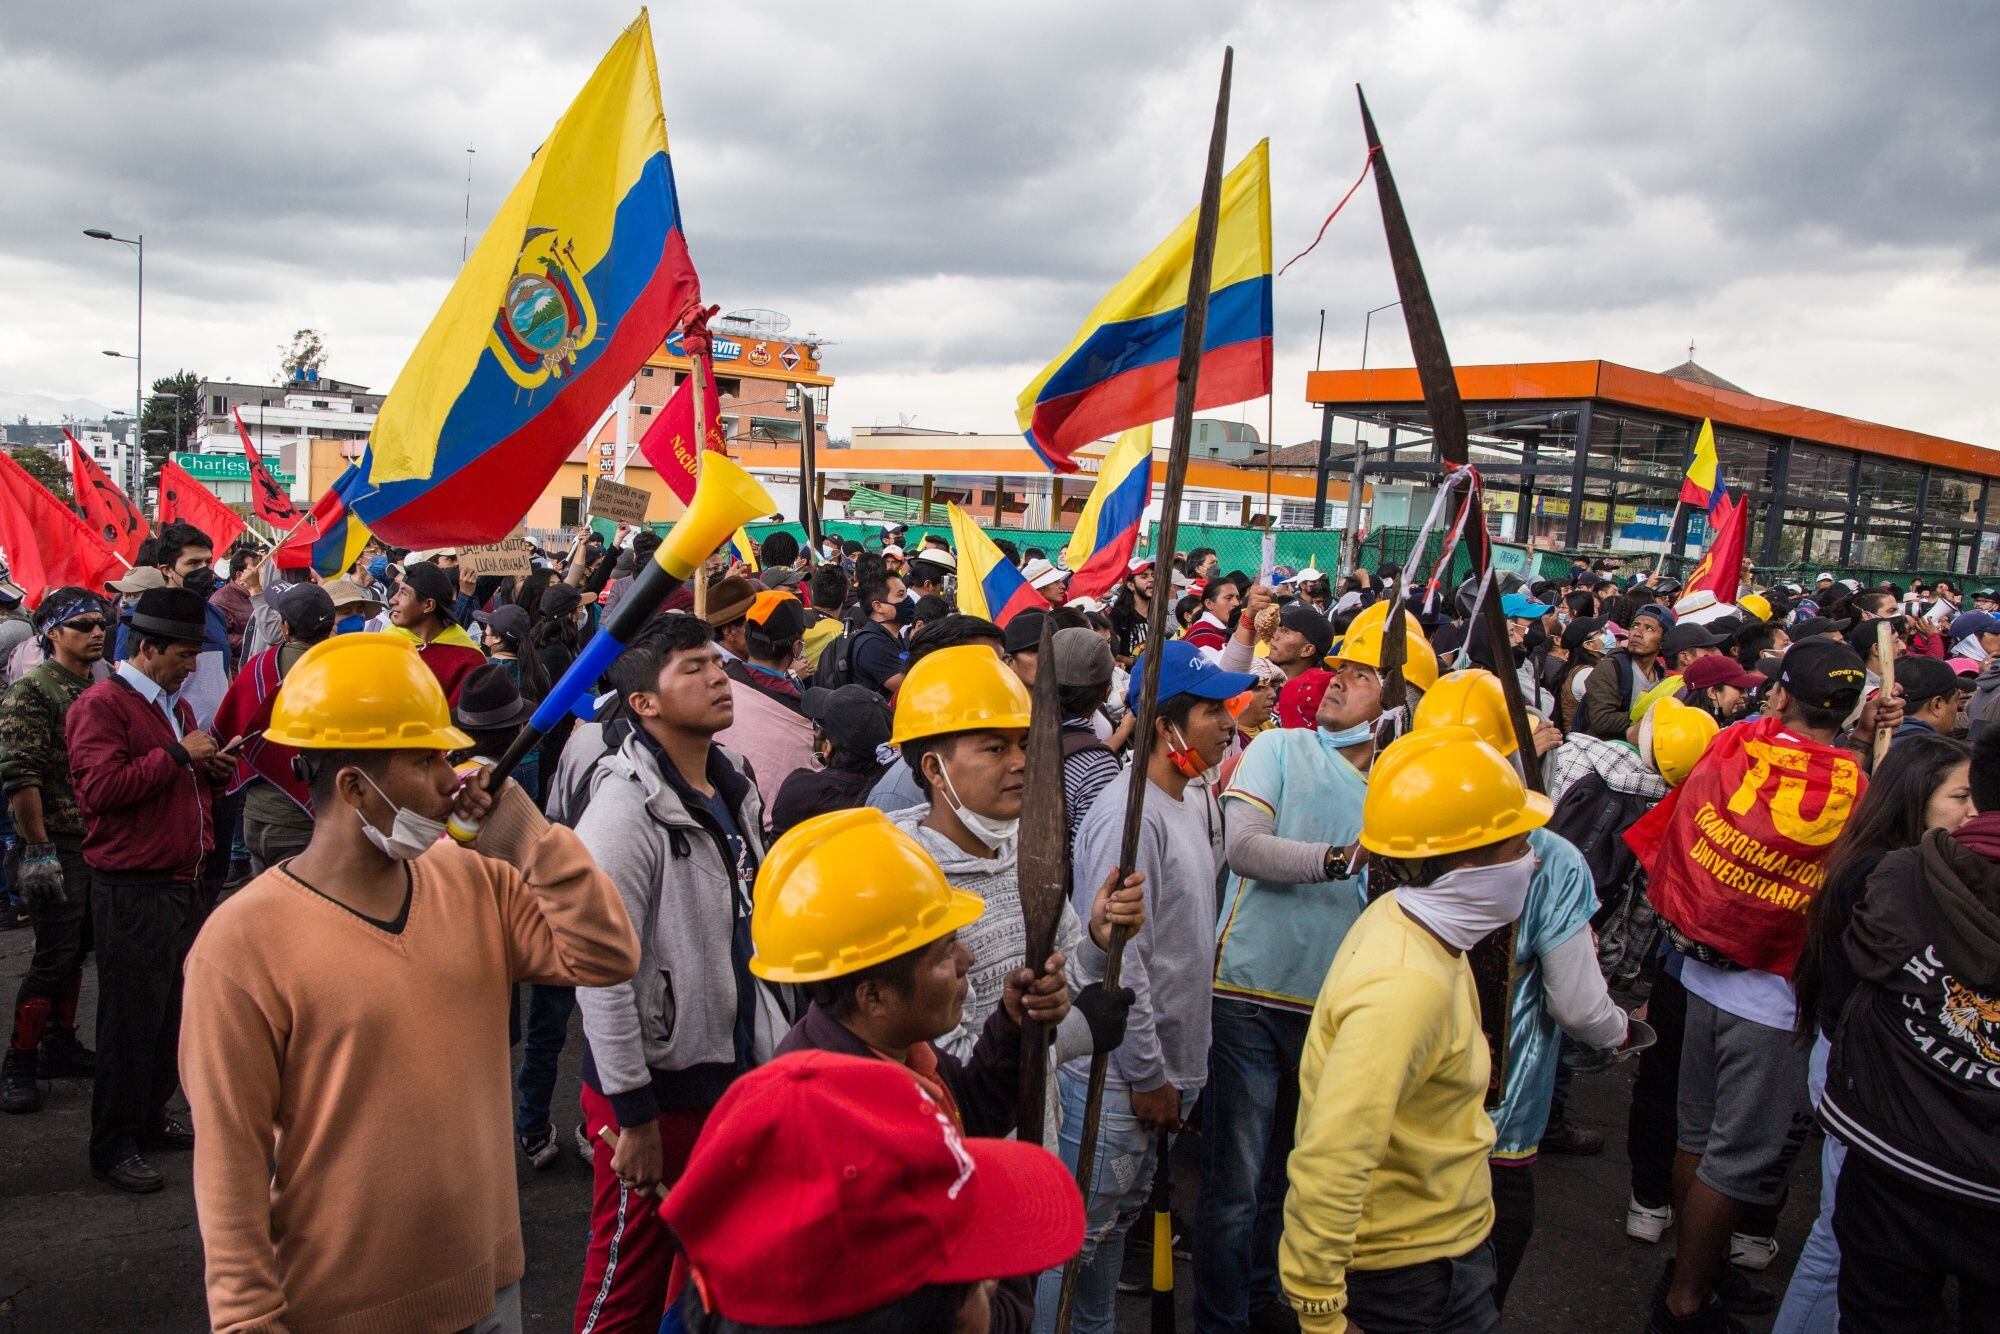 Protesters gather in front of the Ecuadorian Episcopal Conference as negotiations continue on an agreement to end the protests in Quito, Ecuador.